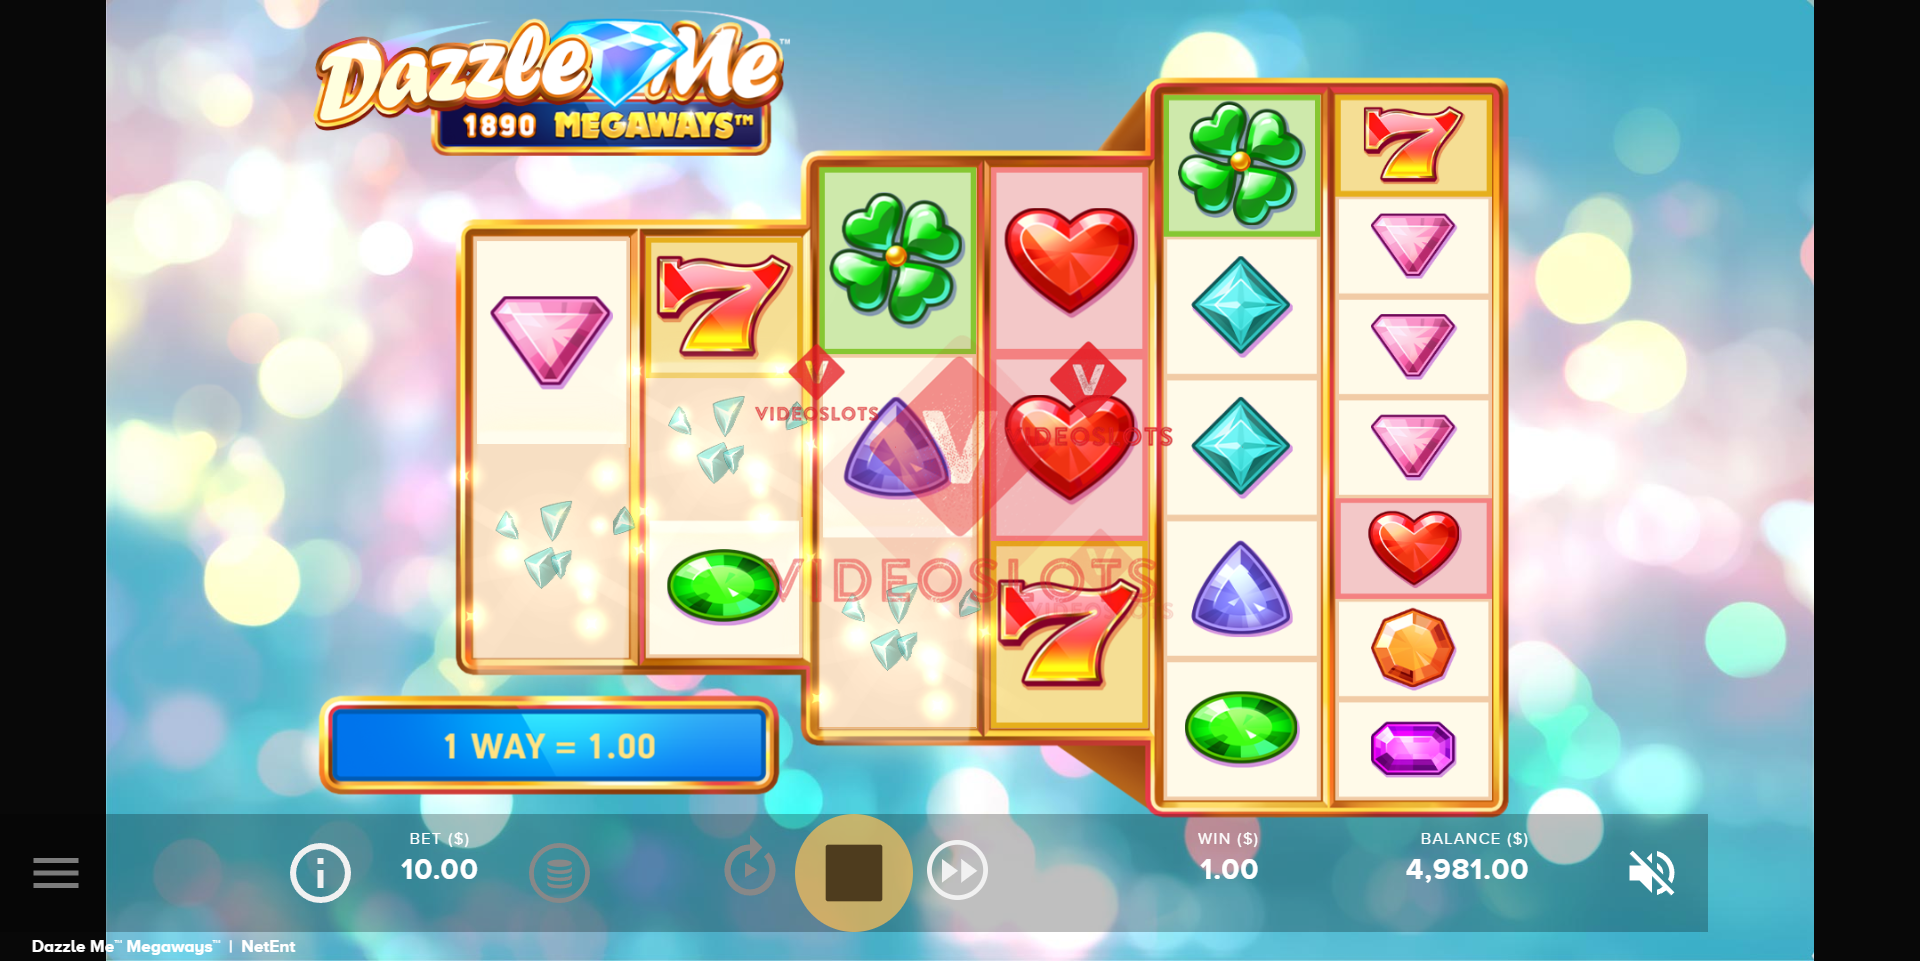 Base Game for Dazzle Me Megaways slot from NetEnt